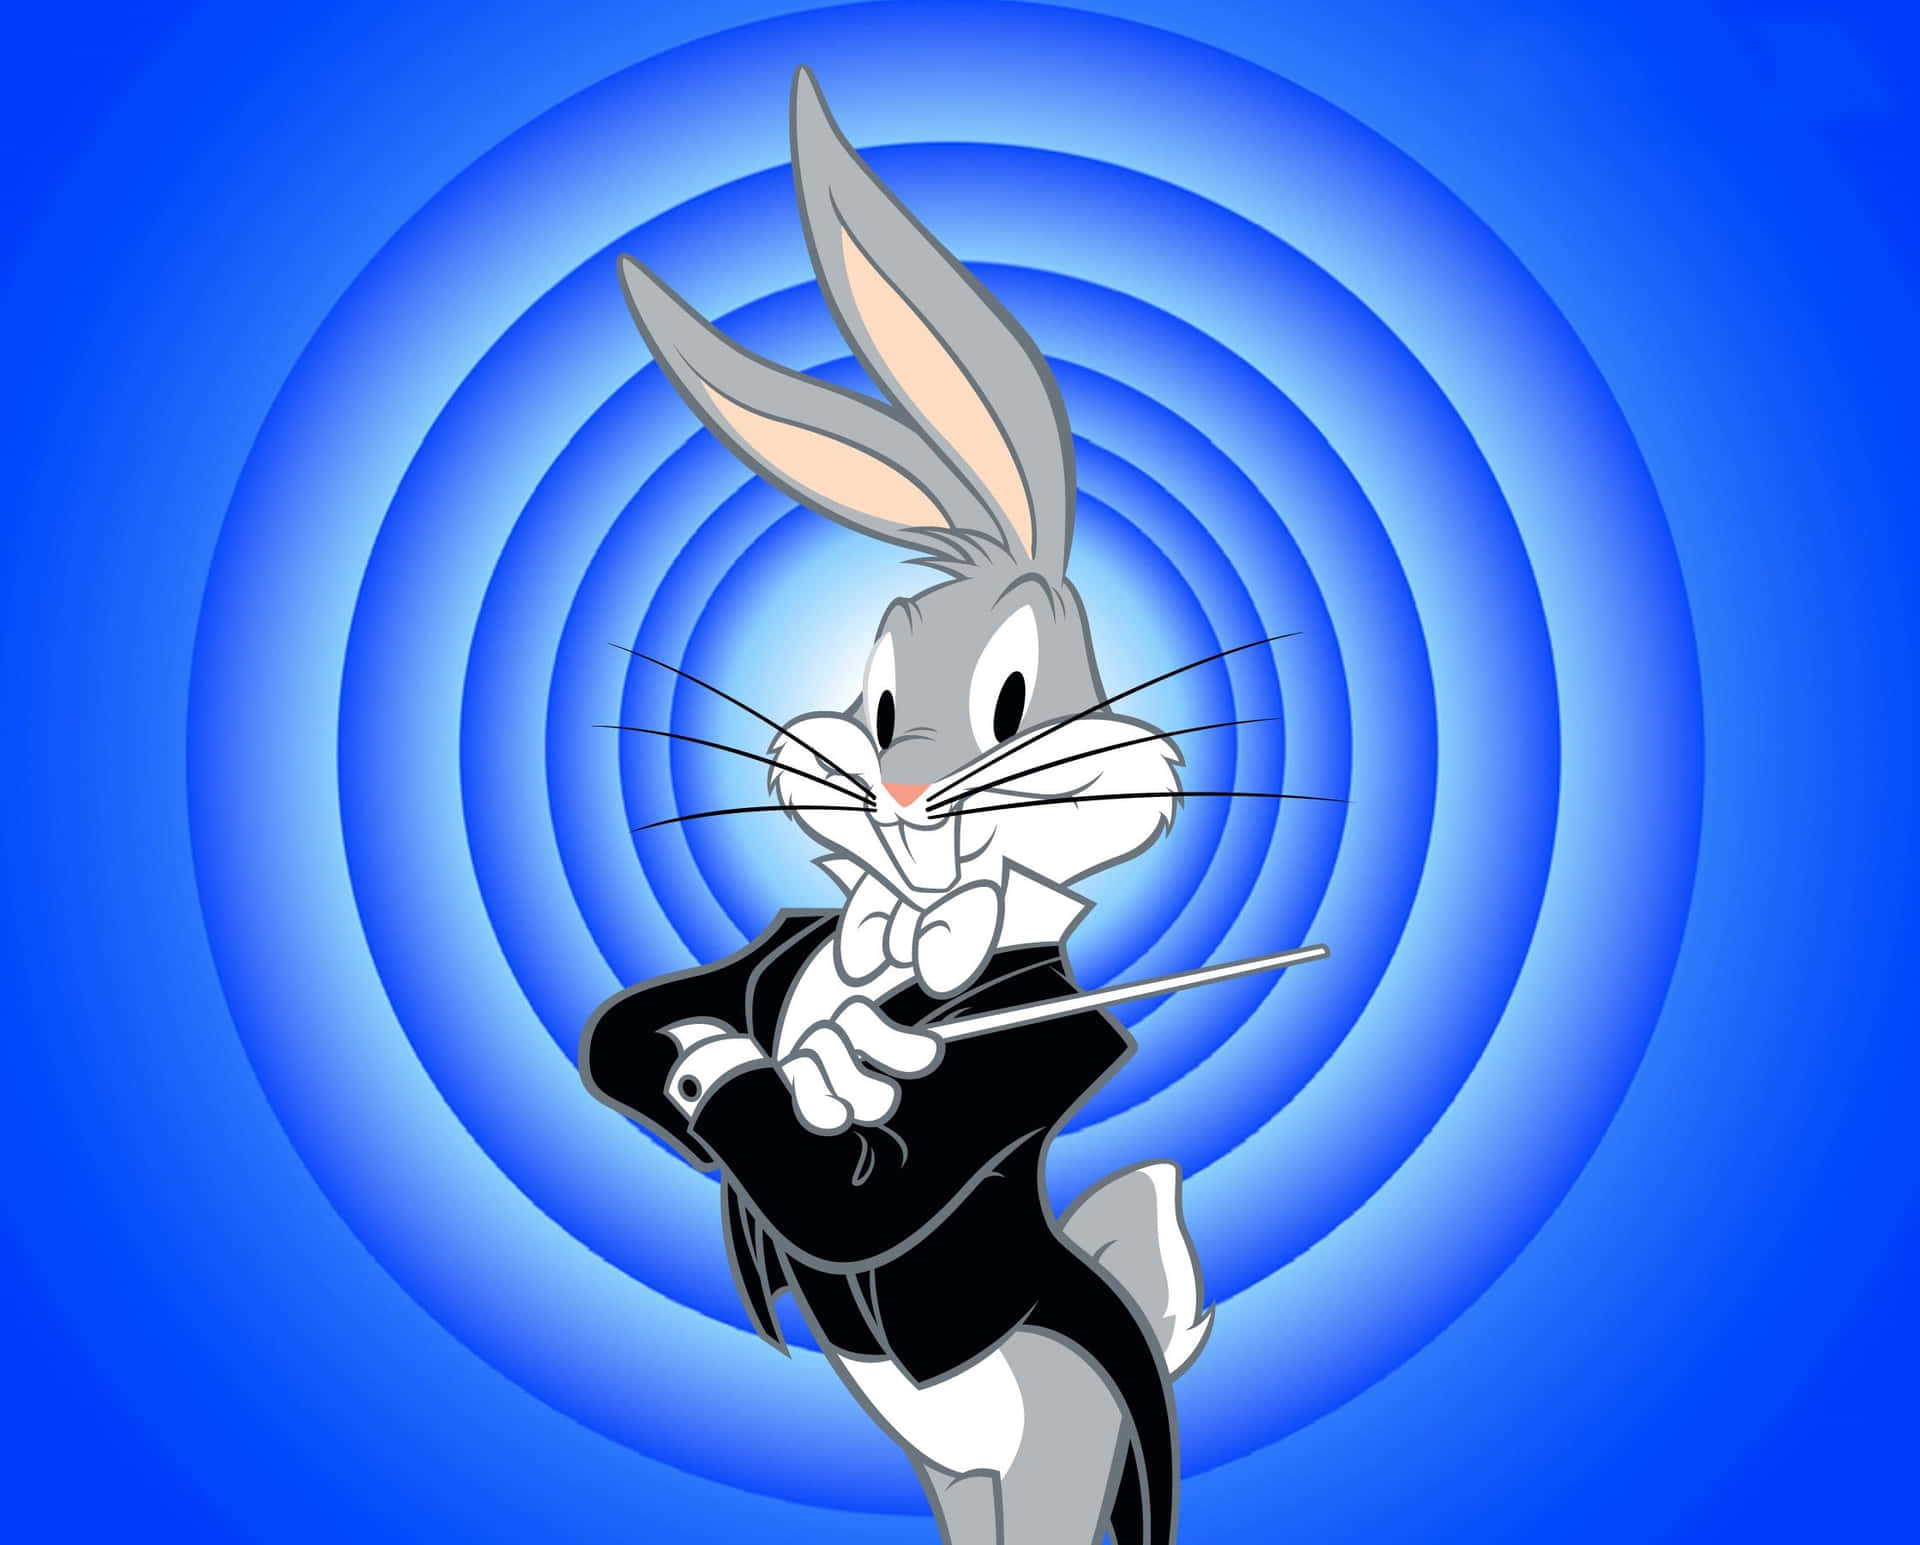 Cool Bugs Bunny Conductor Wallpaper